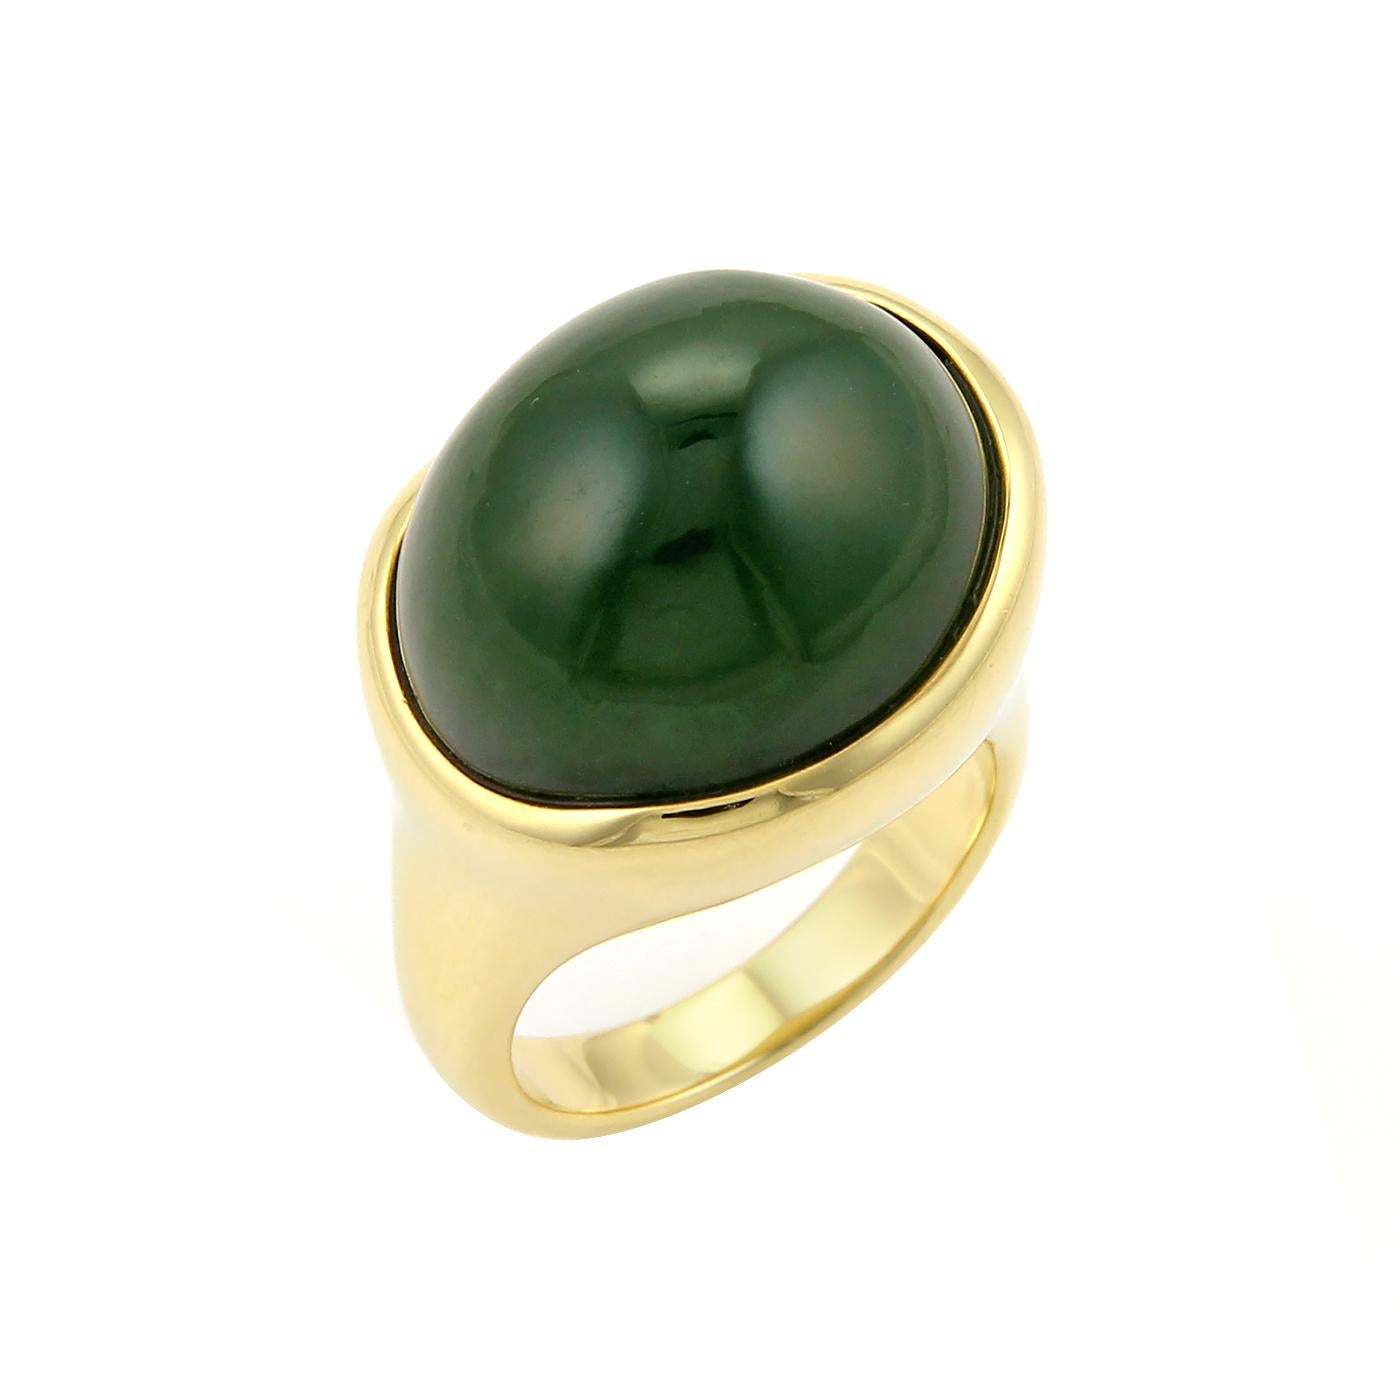 From designer Elsa Peretti by Tiffany & Co. is this charming smooth authentic ring, crafted from 18k yellow gold with a polished finish featuring a slanted wave shape bridge which blends with the shank shoulders and band. The top has a deep green